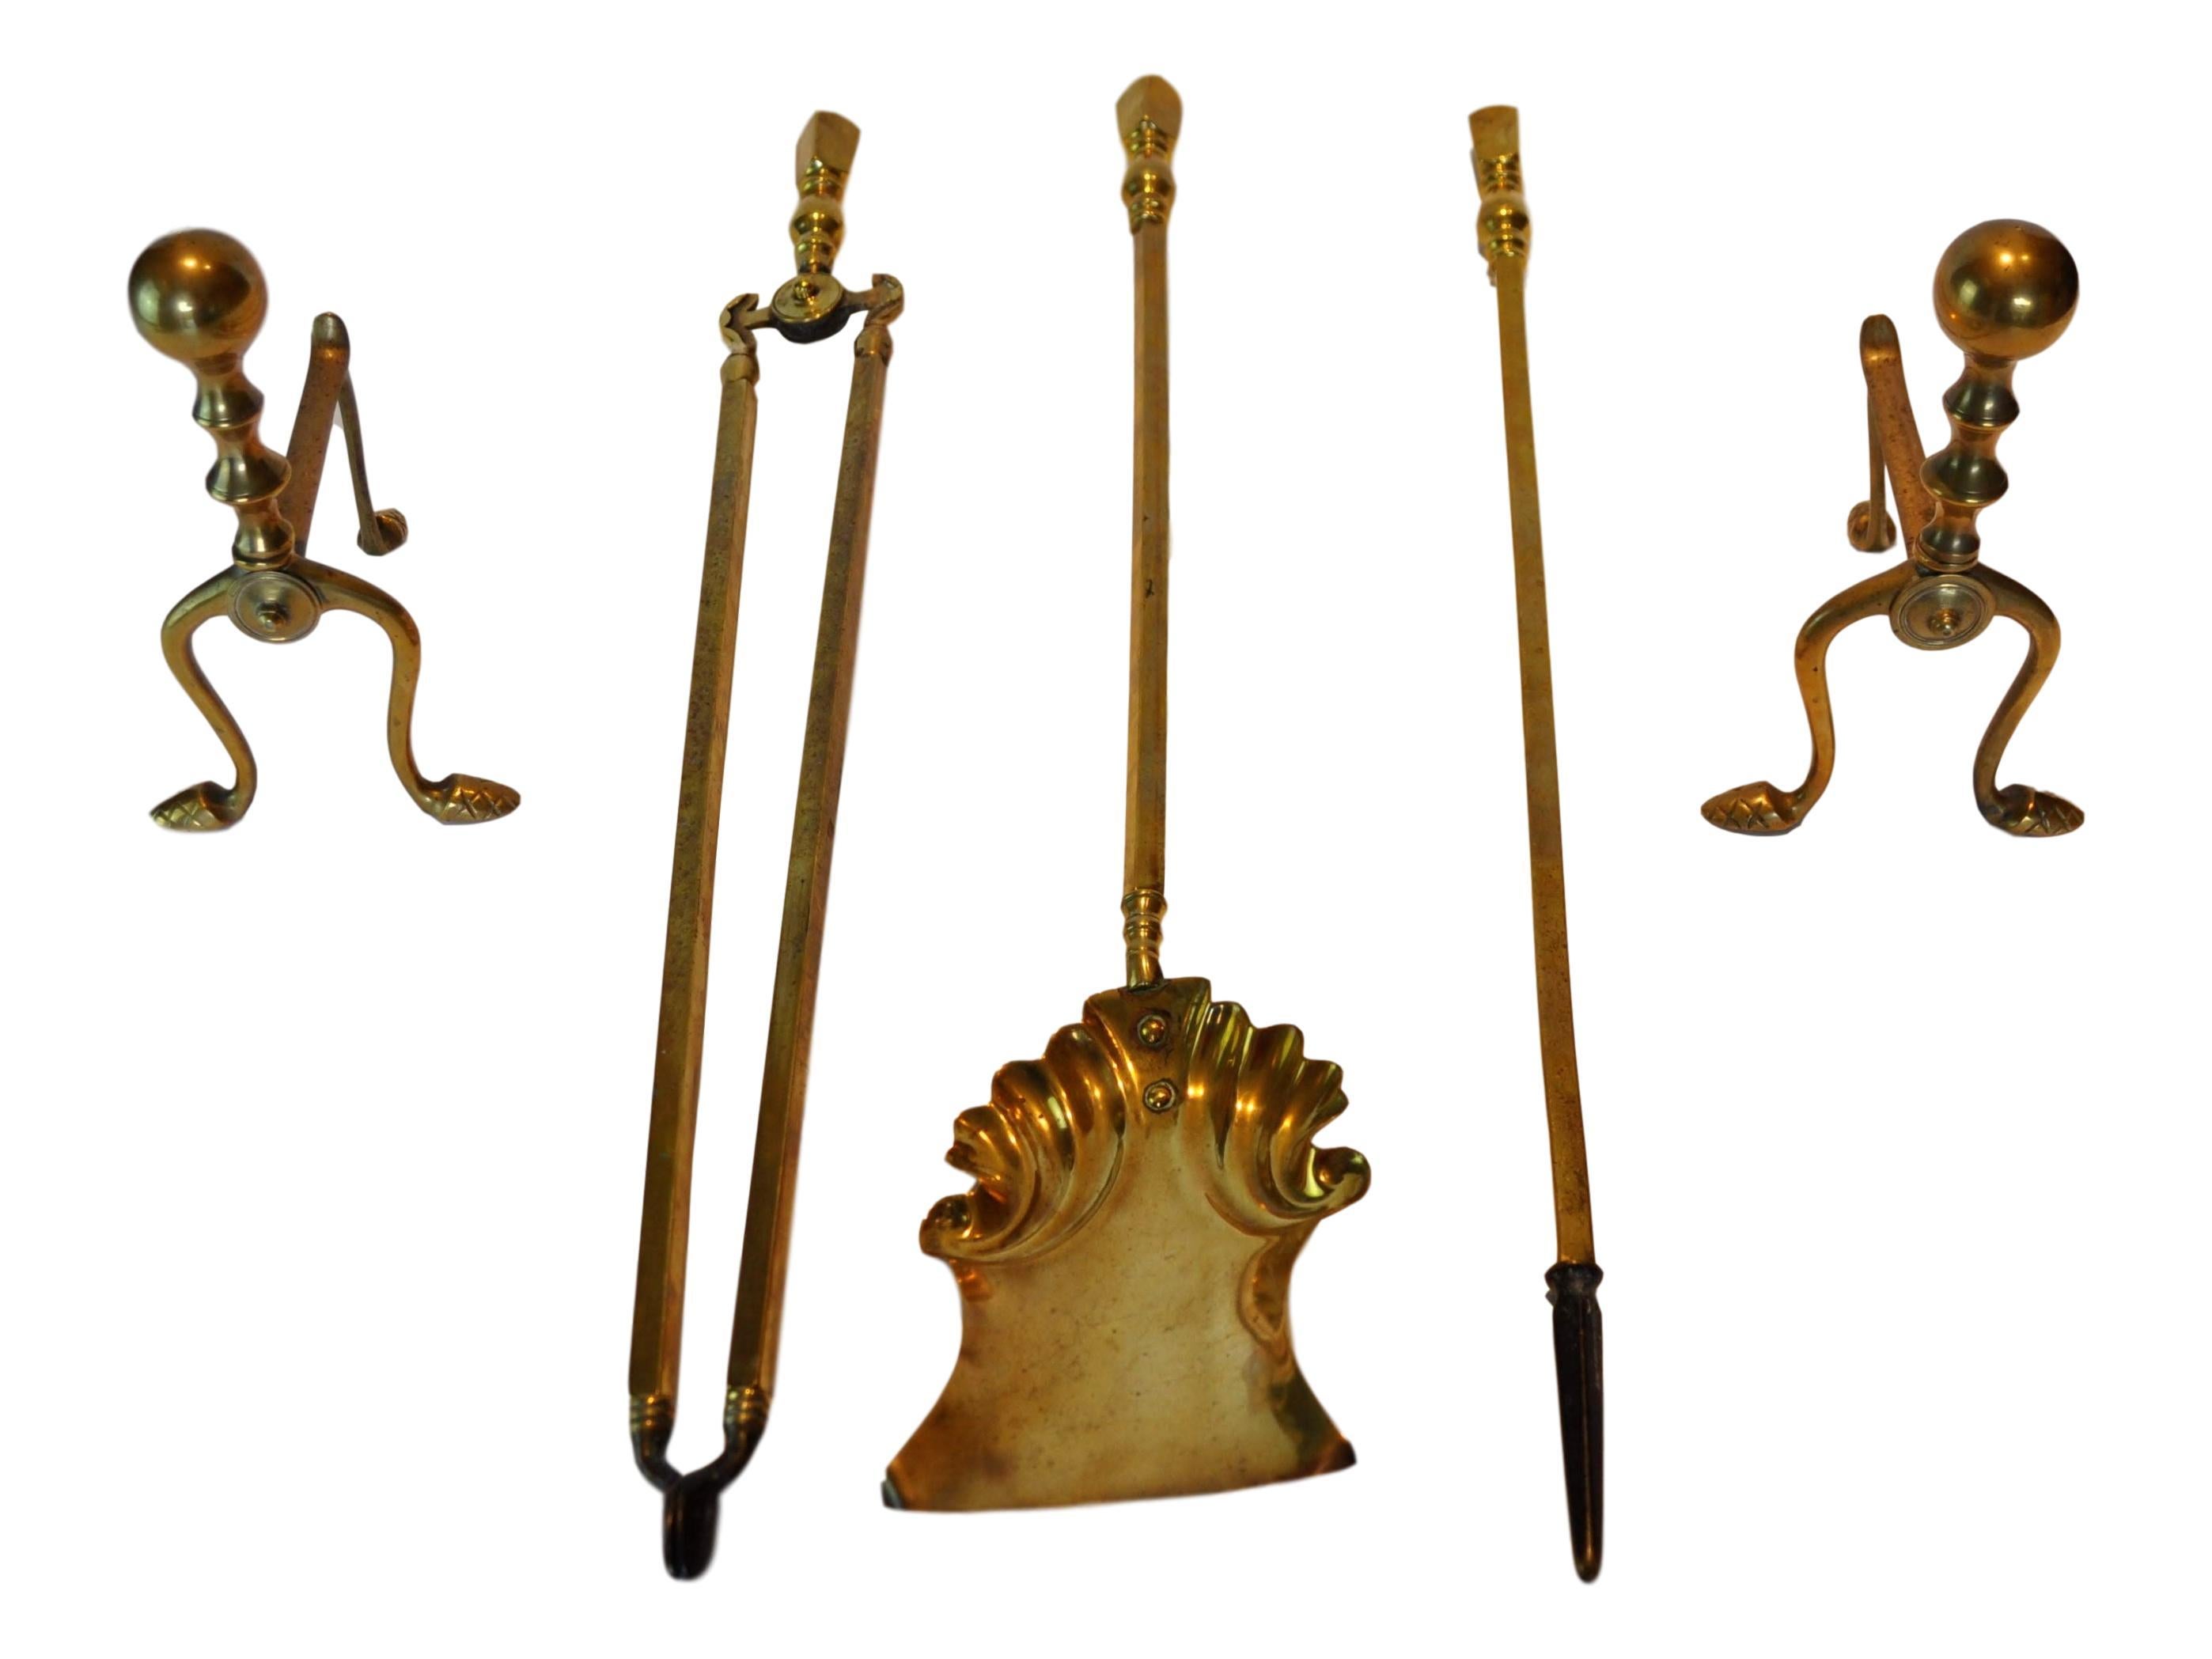 Classic pair of English brass andirons and fire tool set, English circa early 20th century.